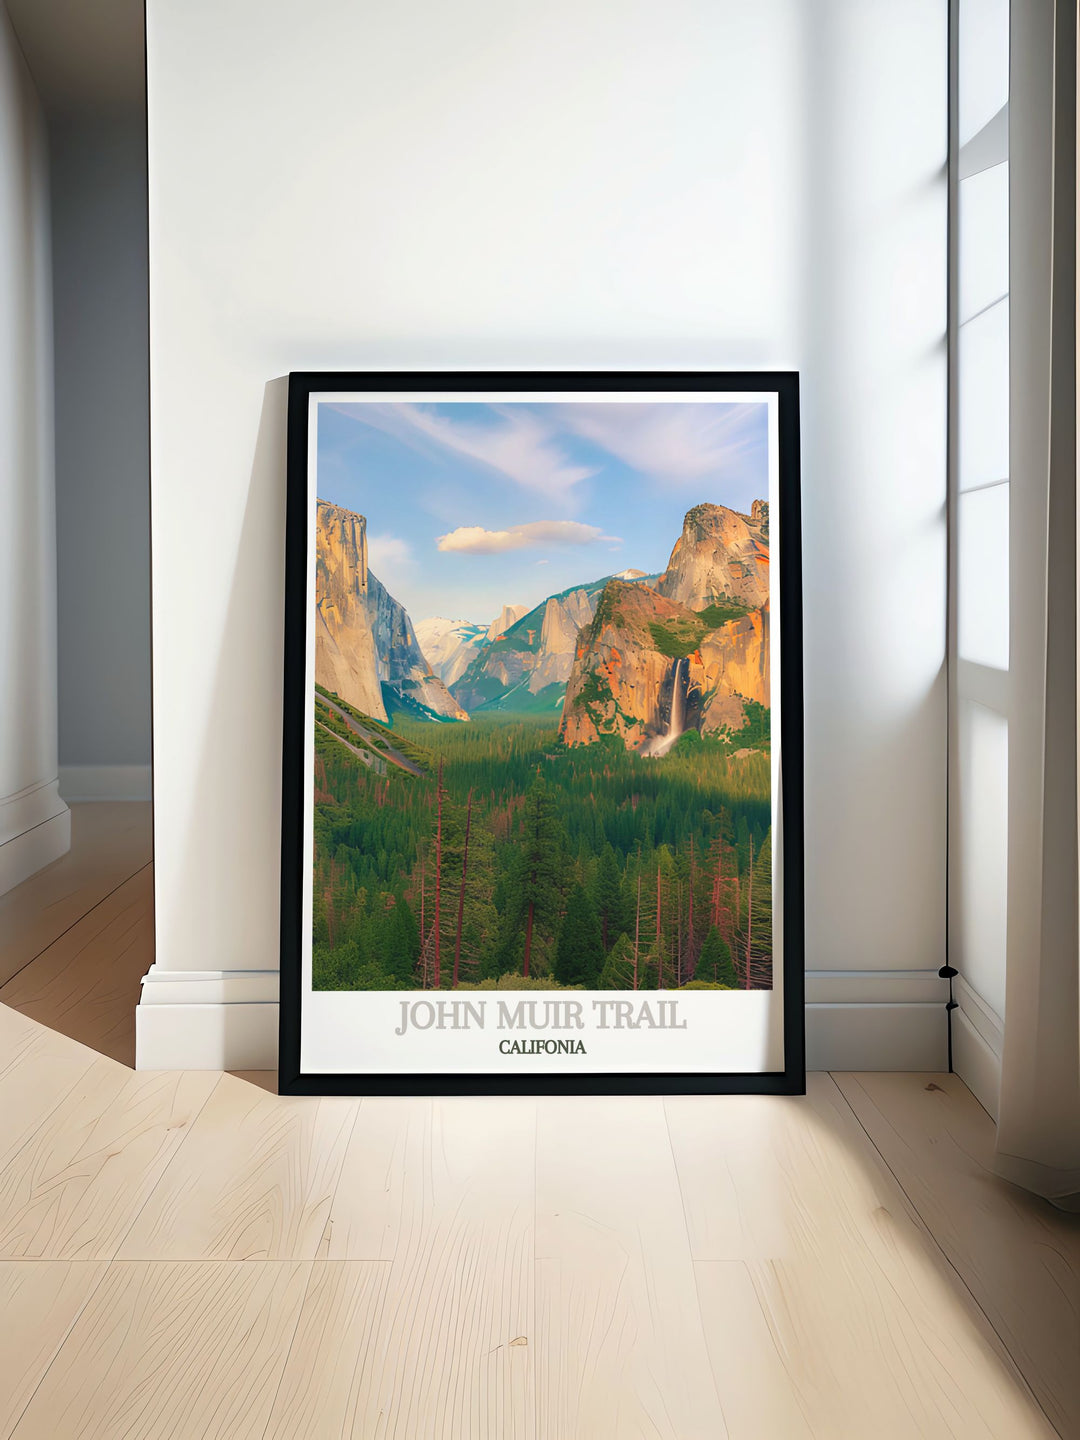 The picturesque Yosemite Valley, known for its serene beauty and iconic landmarks, is highlighted in this travel poster. Perfect for those who appreciate natural wonders, this artwork captures the charm of Californias famous valley.